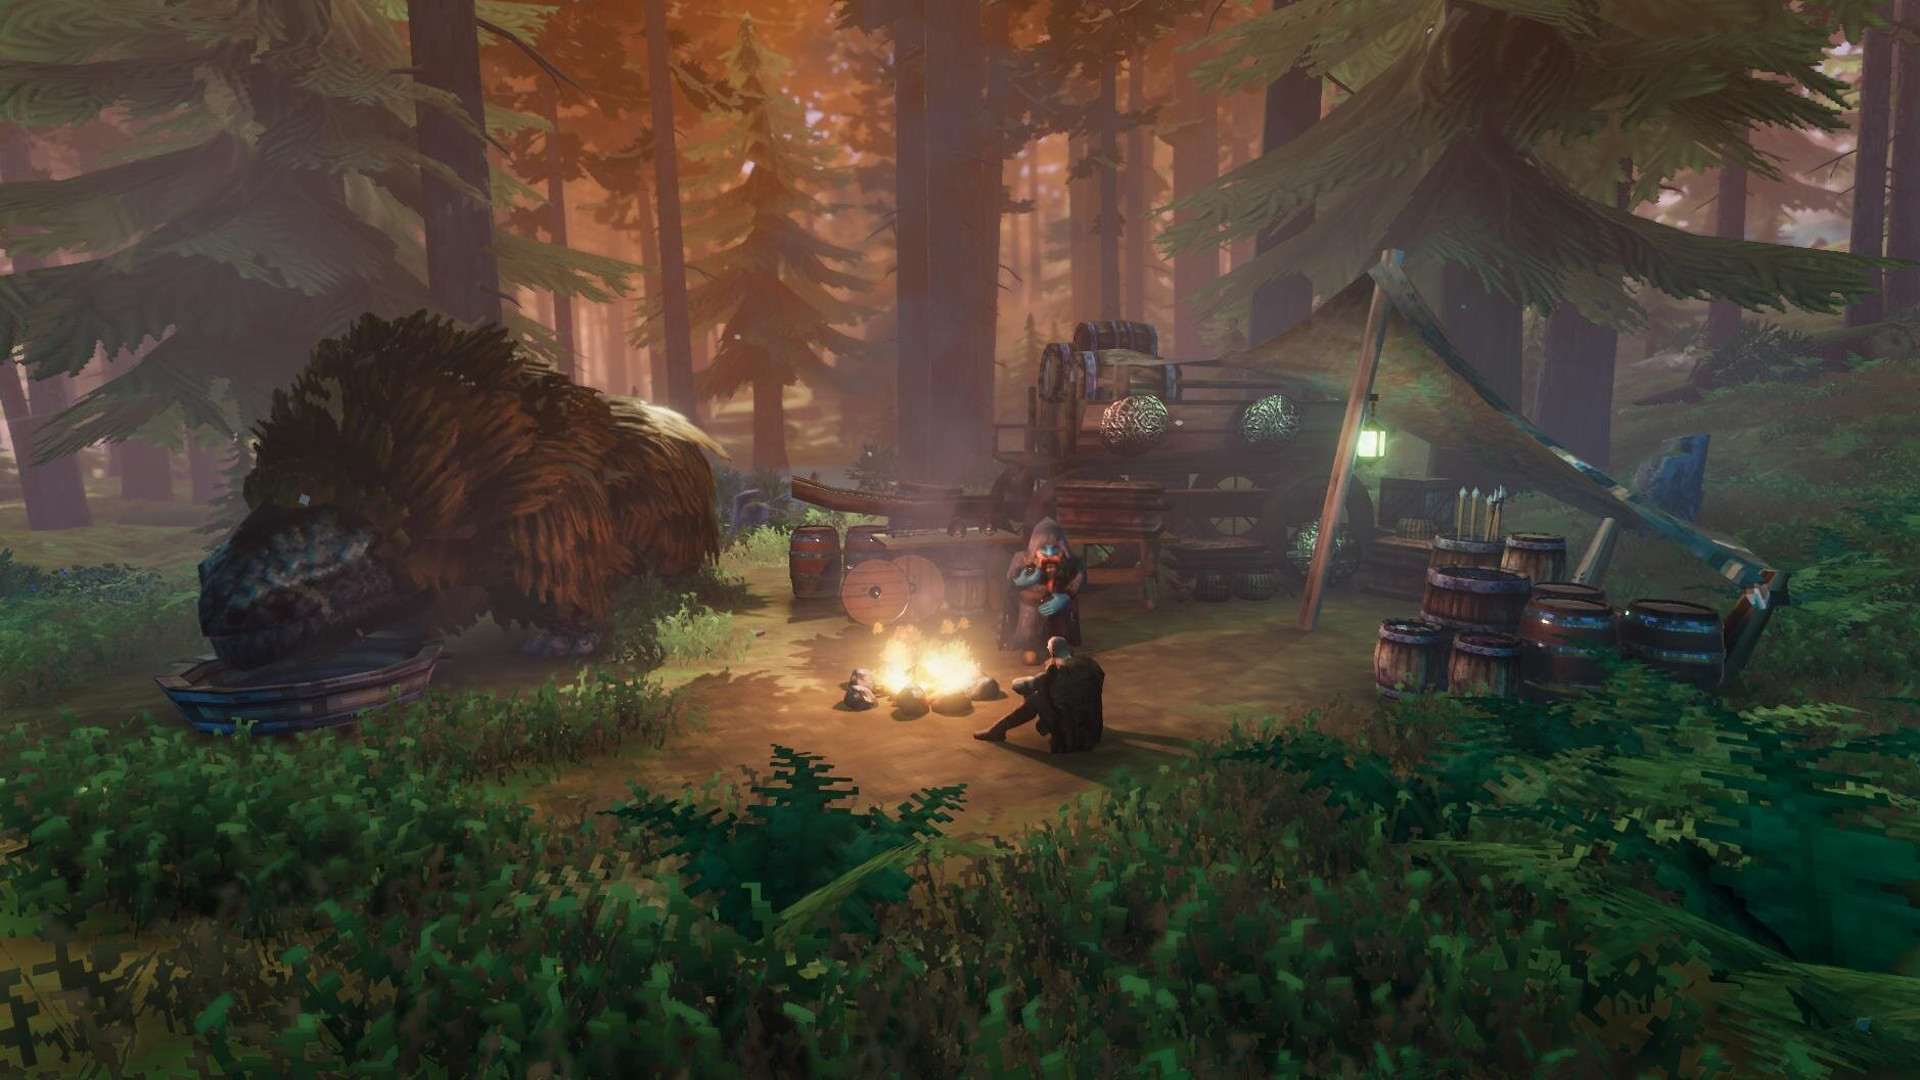 Screenshot for the game Valheim [0.145.6 Early Access] (2021) download torrent RePack from xatab